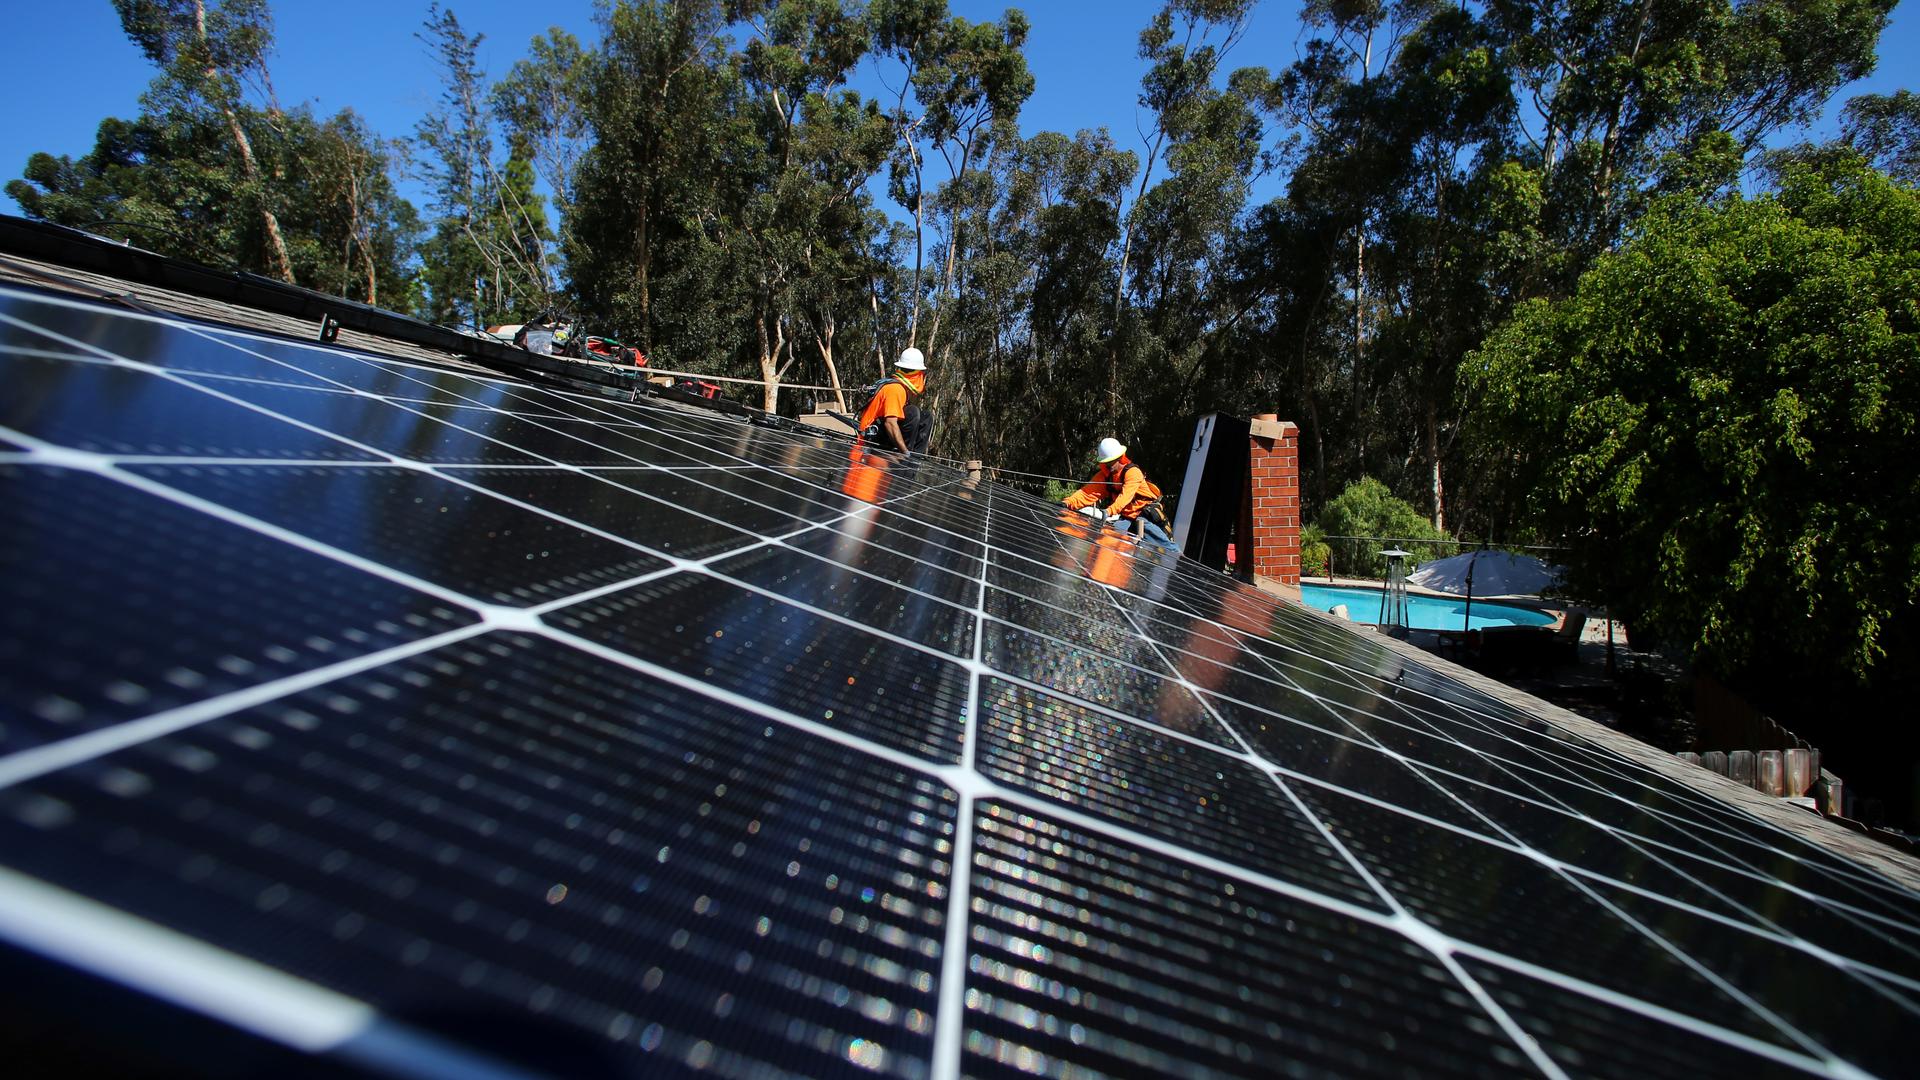 workers intsall solar panels on a rooftop in california